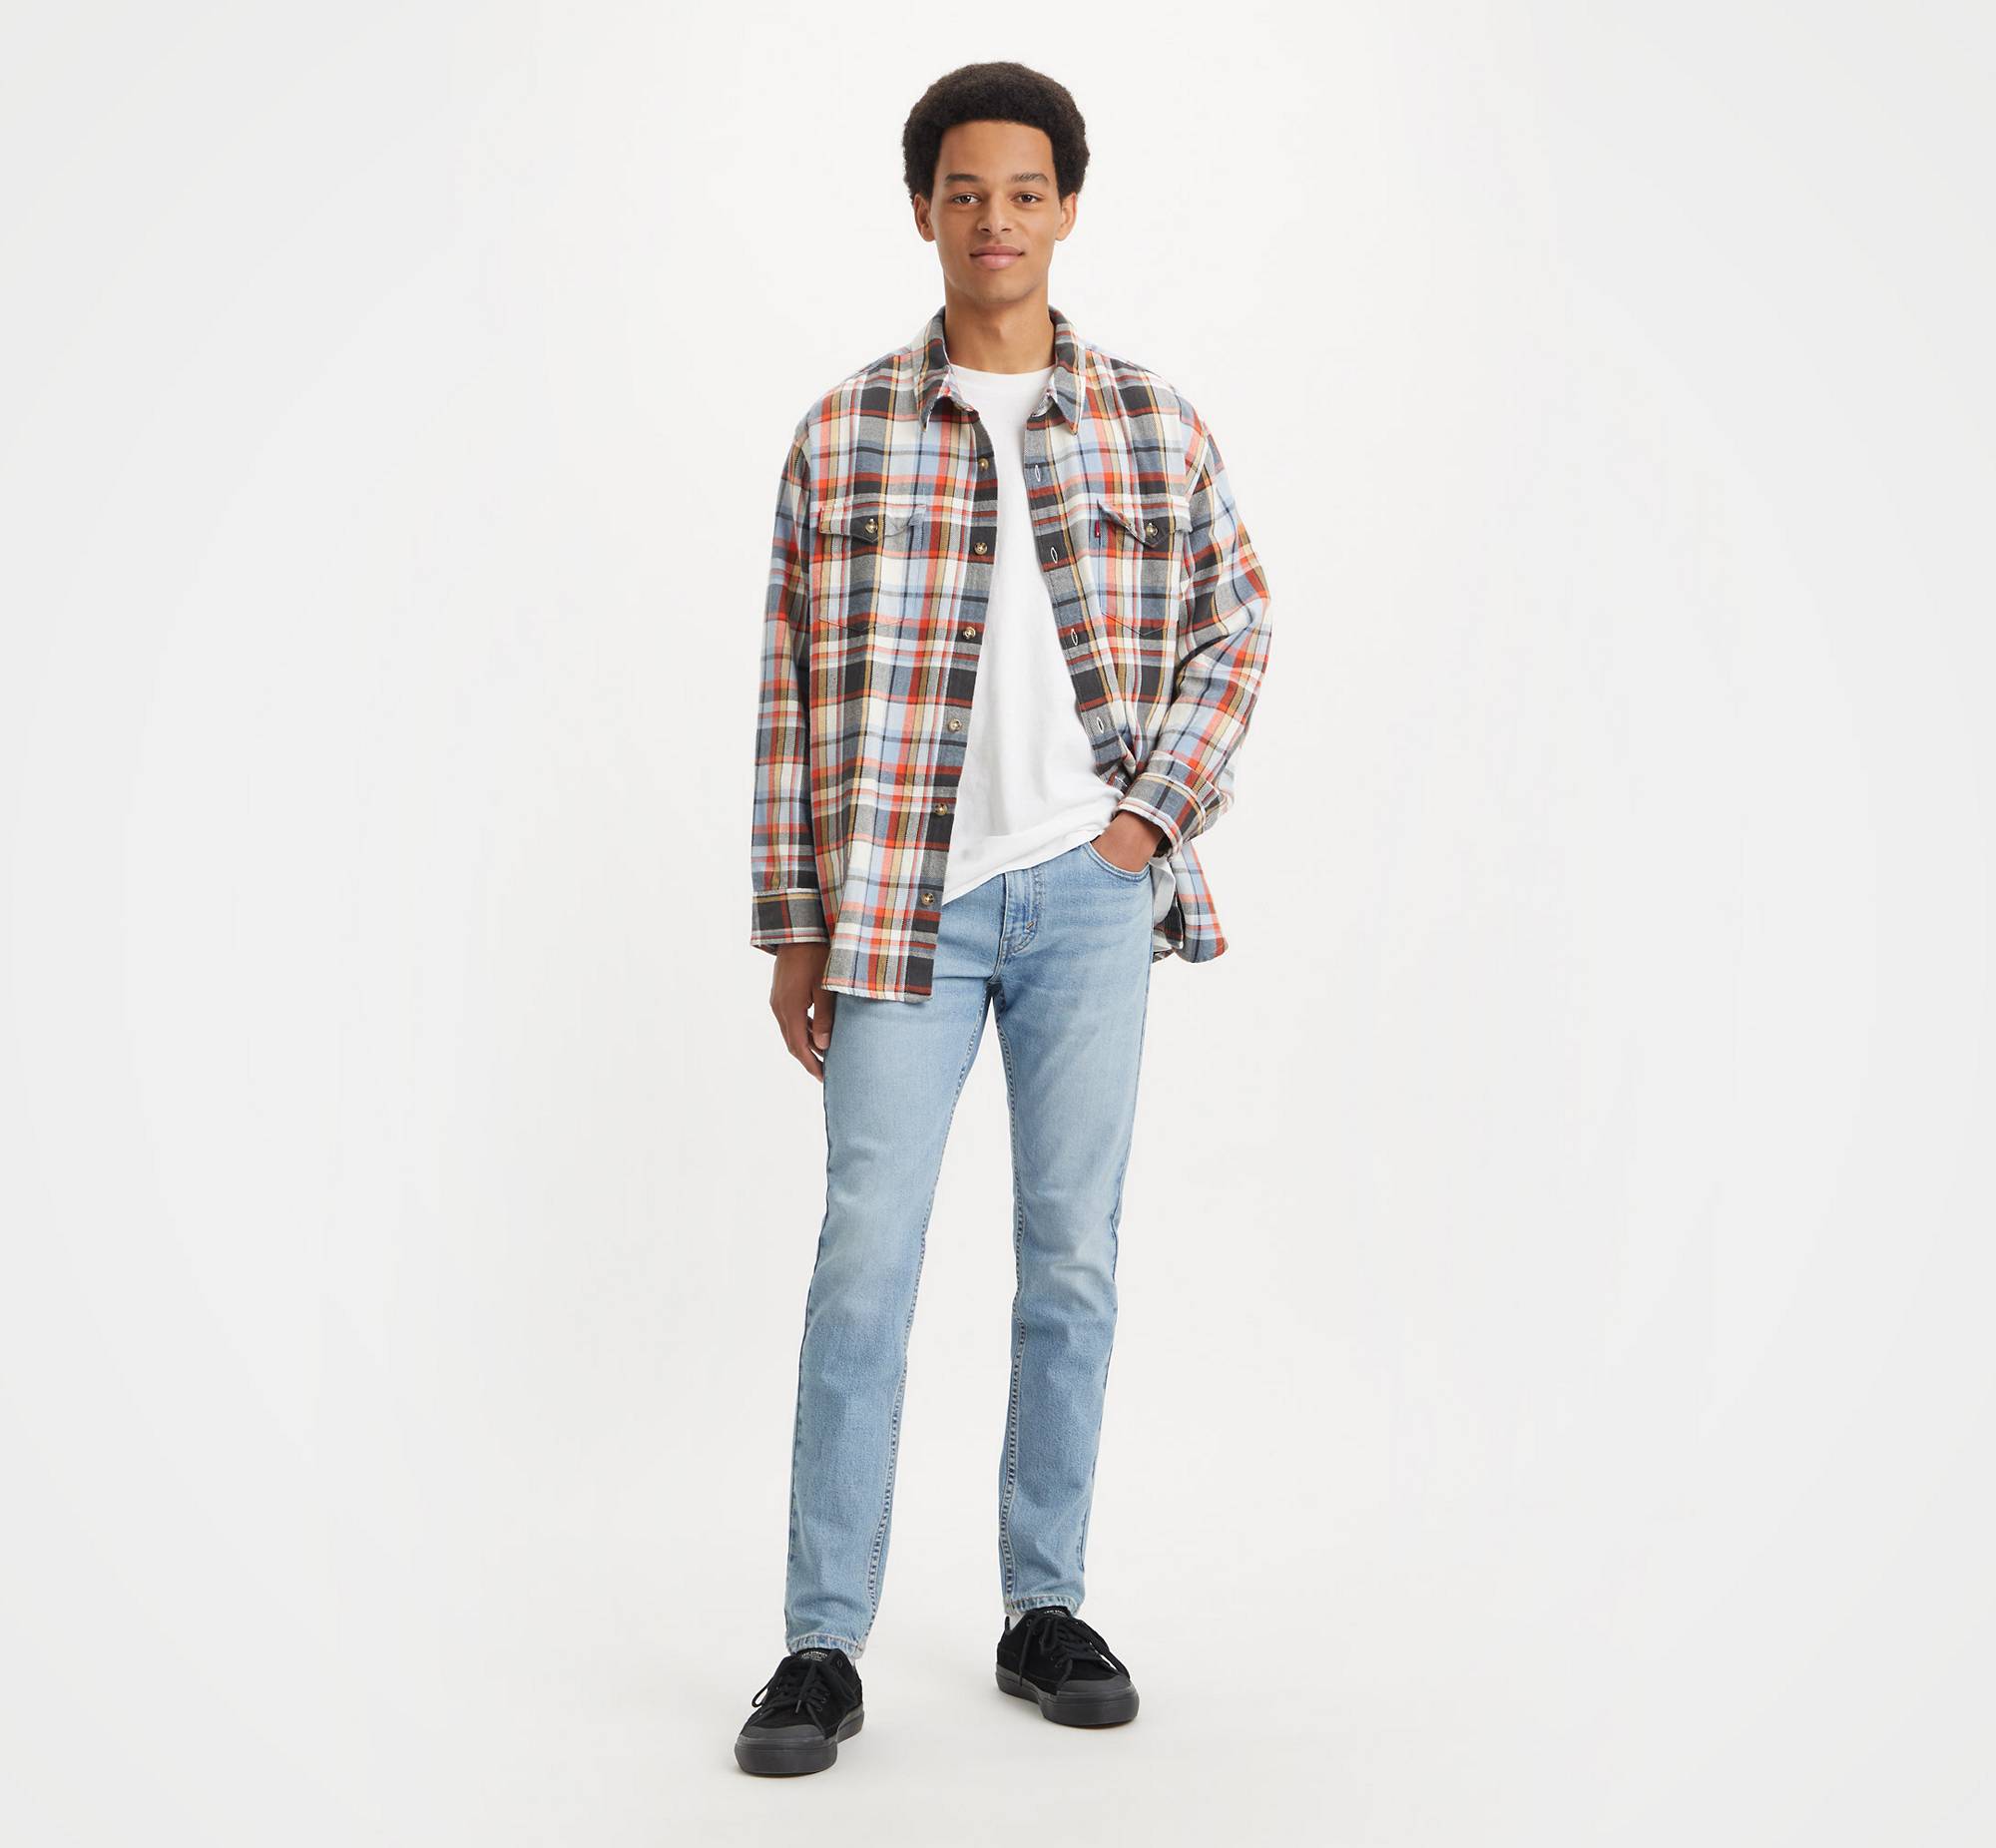 512™ Slim Tapered Lo-Ball Jeans 5